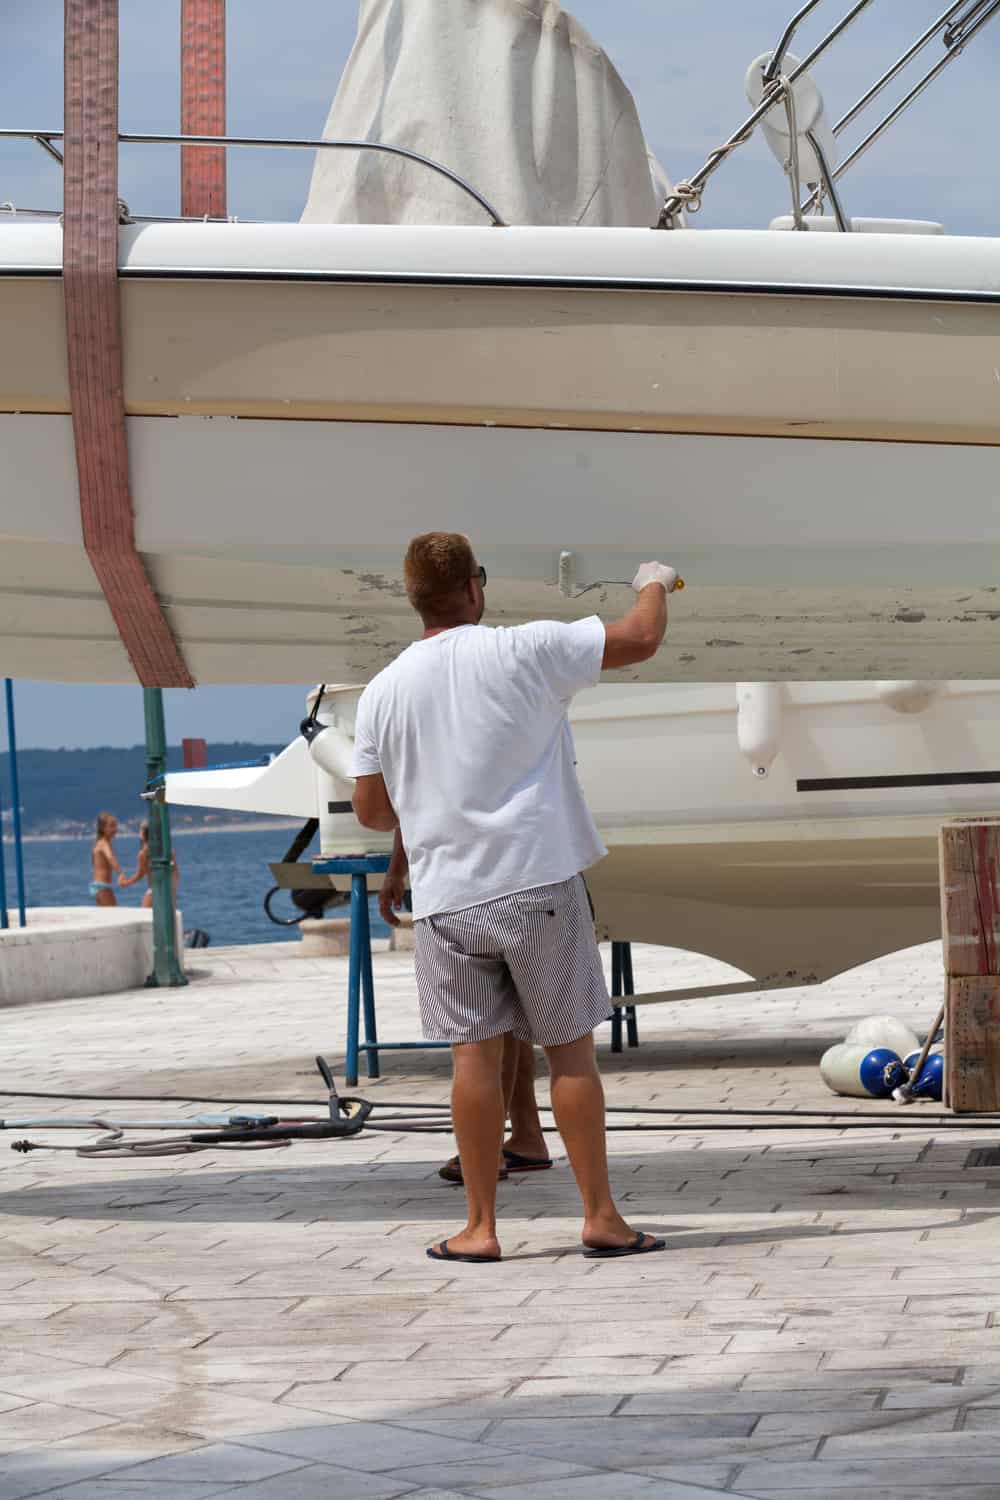 What You Will Need for boat painting